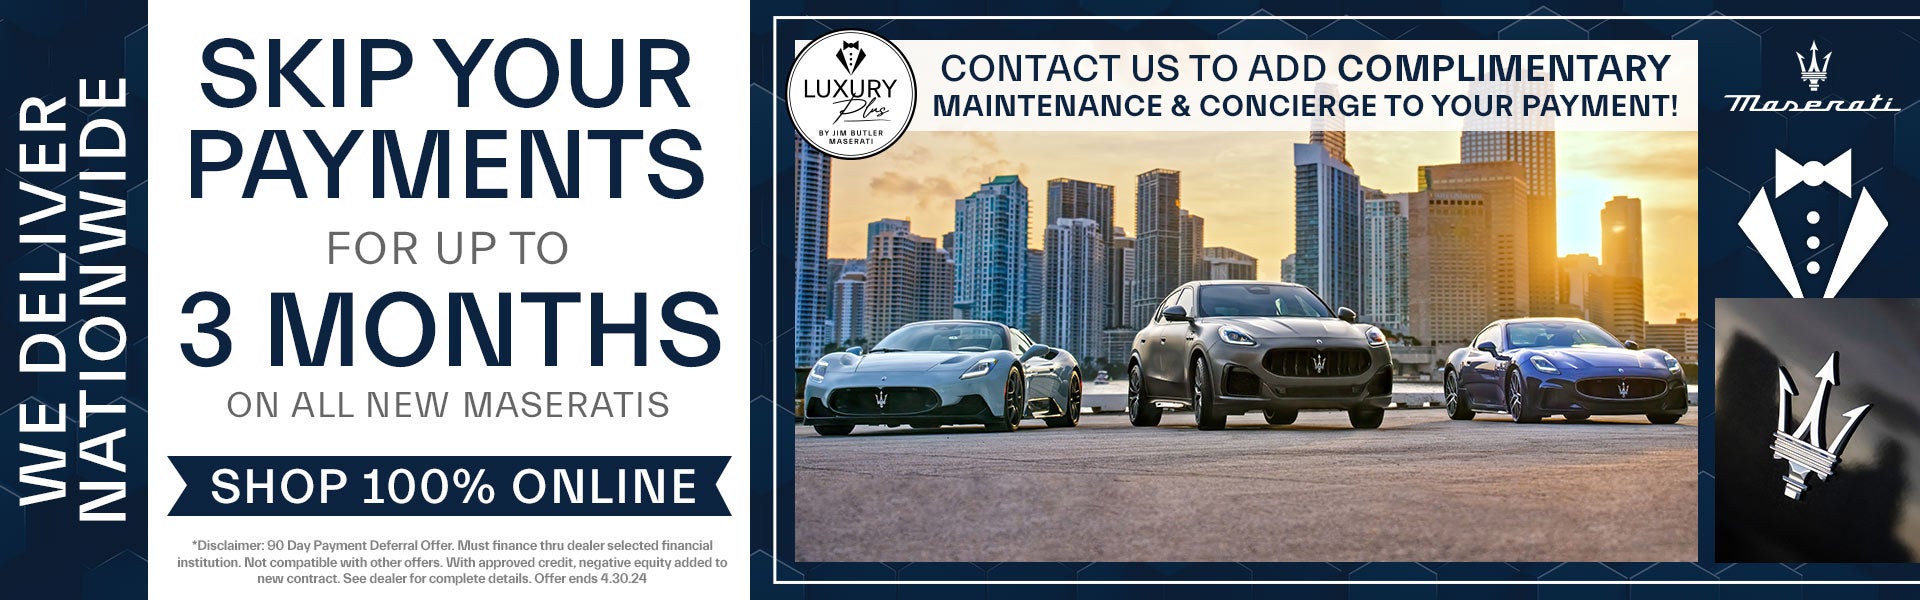 Skip Your Payments for up to 3 Months on all new Maseratis